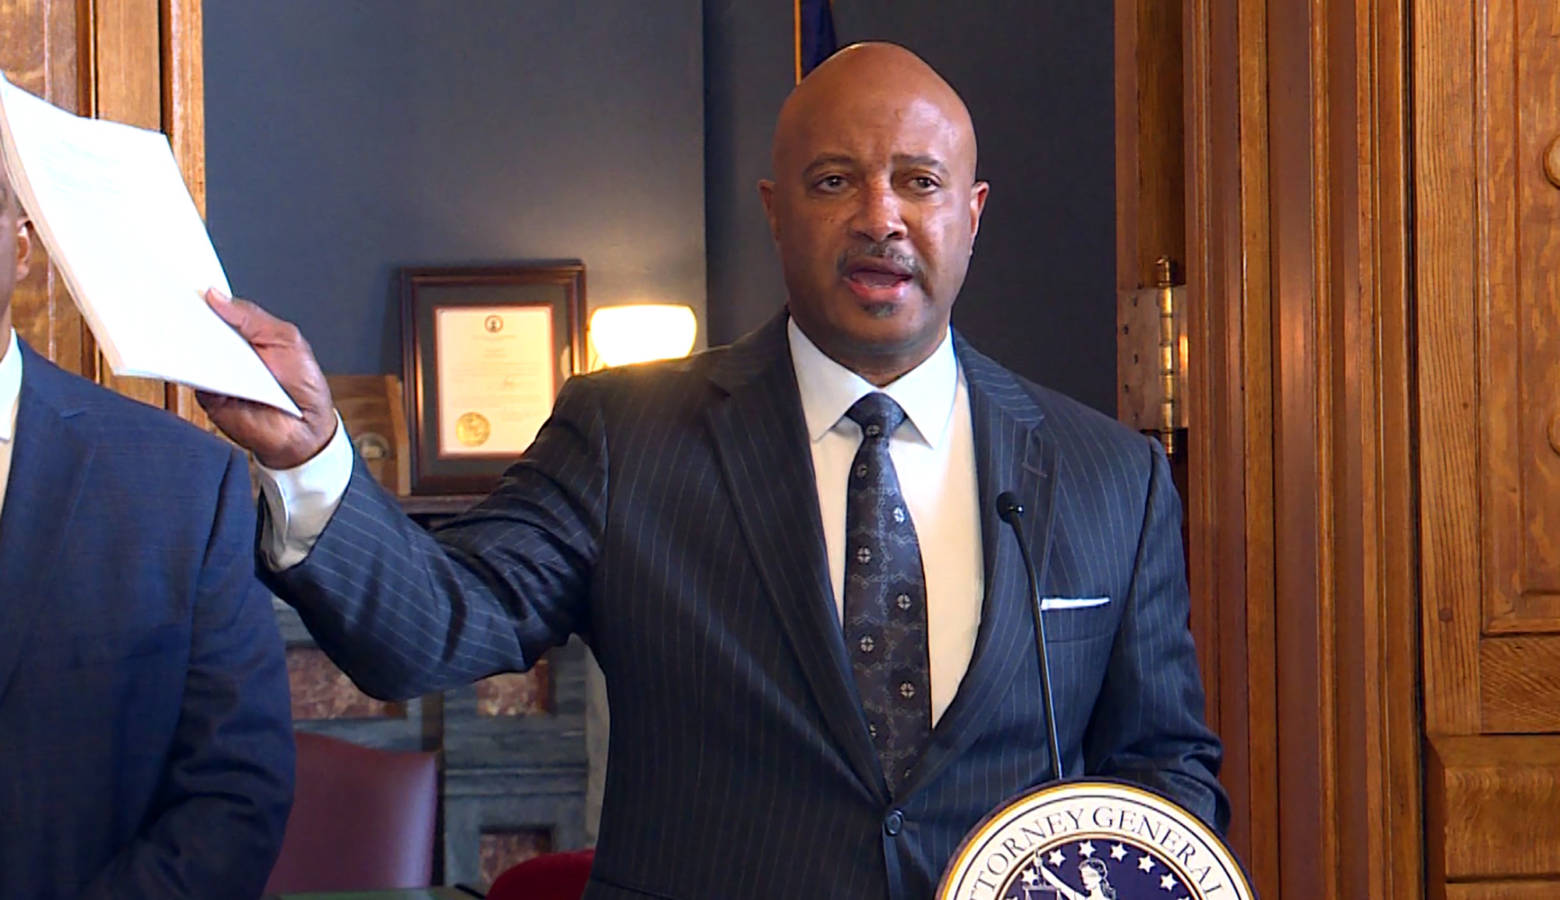 Attorney General Curtis Hill holds the 92 page complaint against opioid manufacturer Purdue Pharma during a press conference. He says the company "played a key role" in the state's opioid crisis. (Lauren Chapman/IPB News)